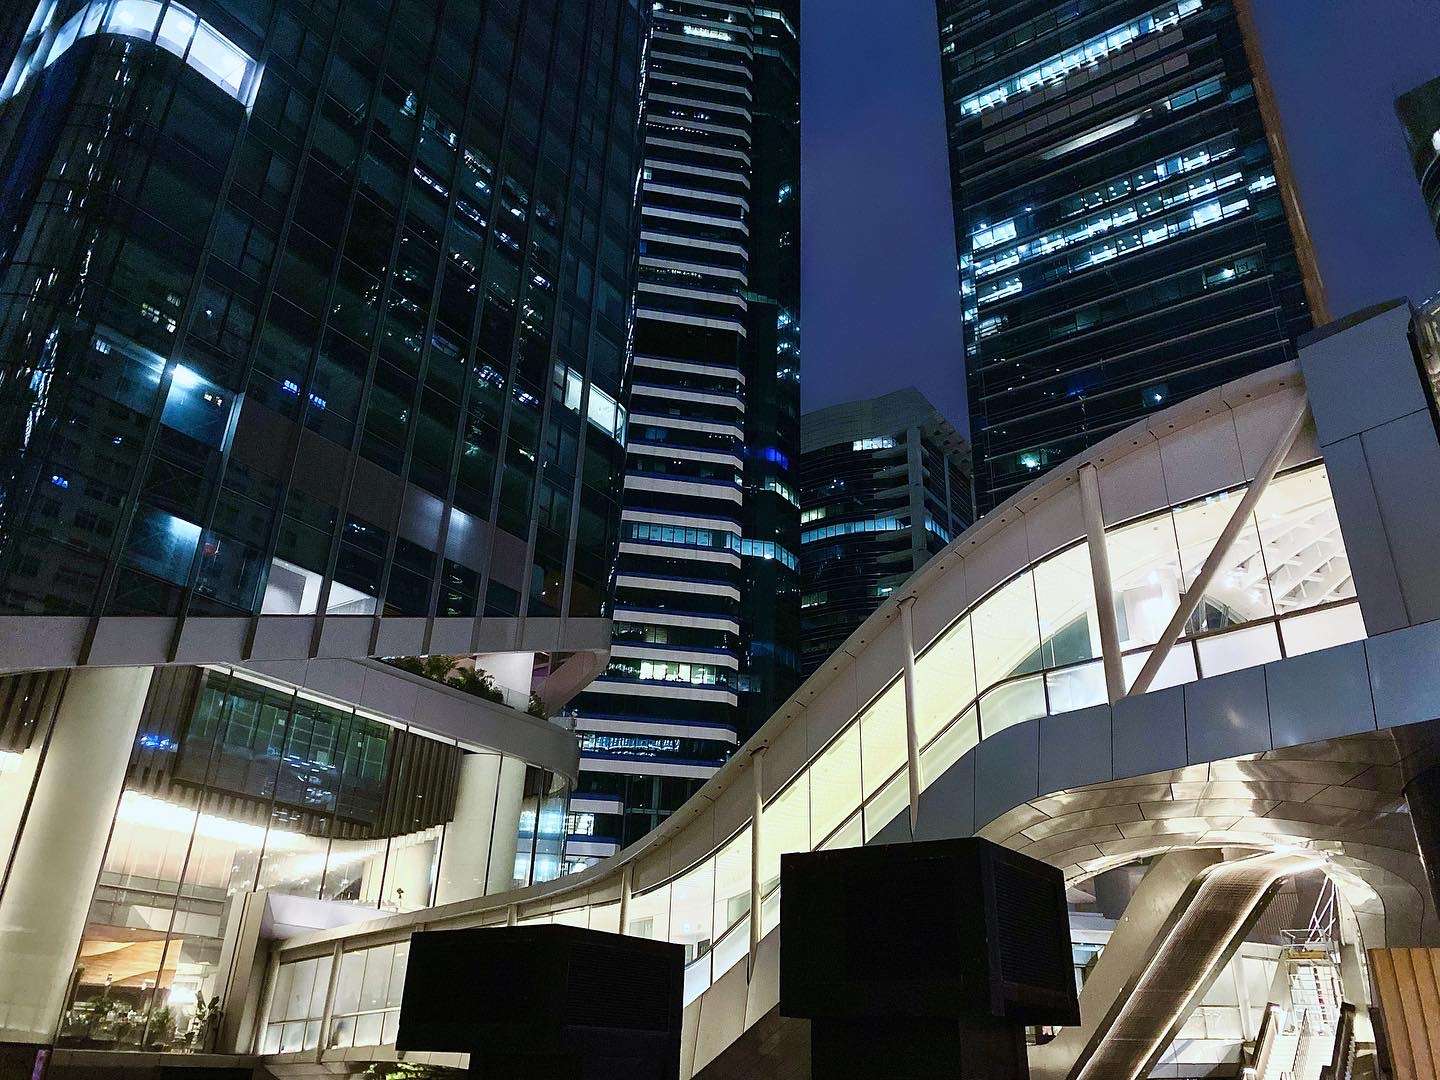 Photograph of skyscrapers and buildings used in final animation piece.